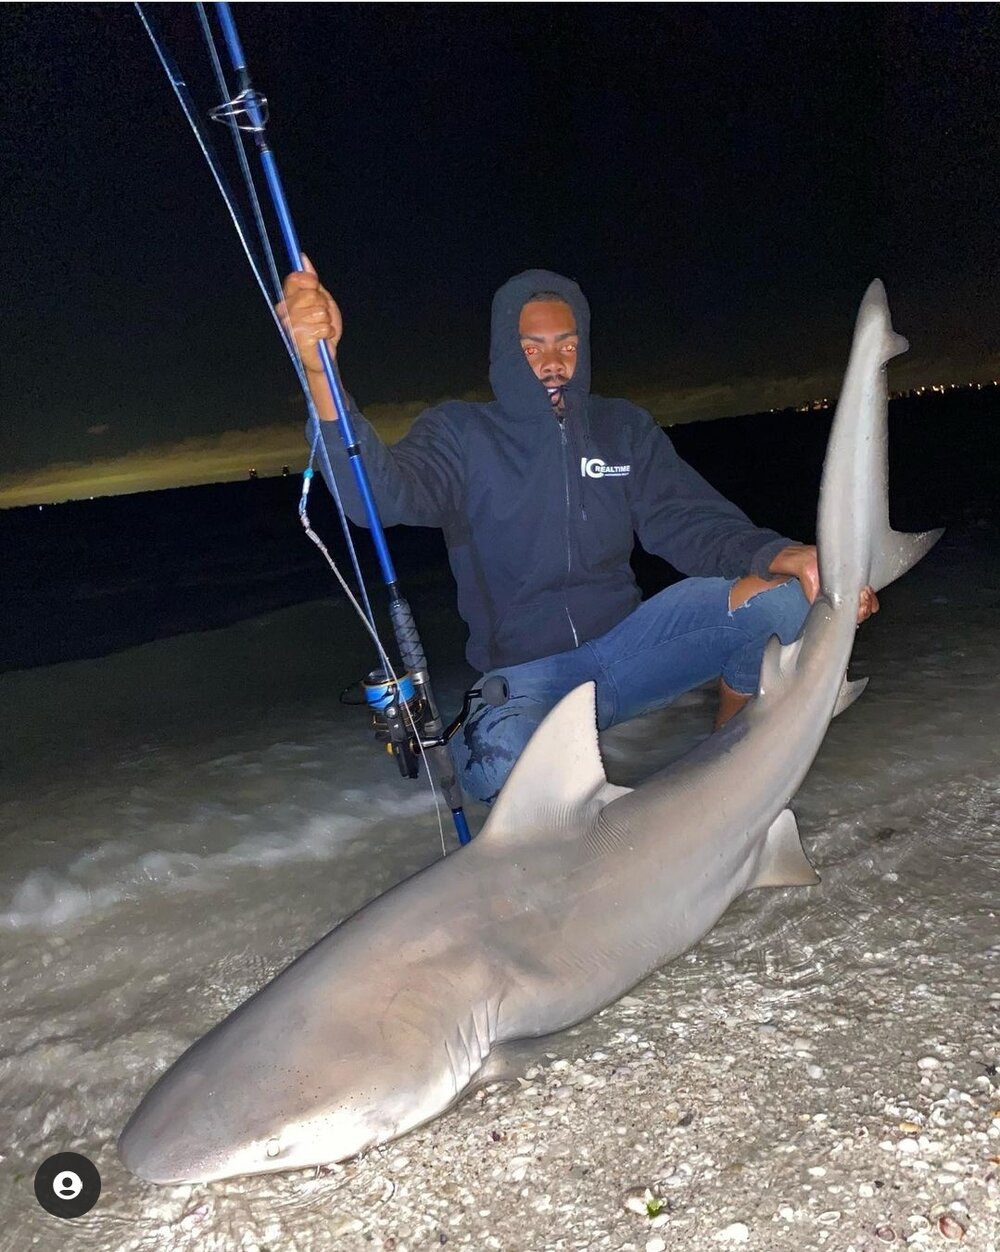 20ft 400/480lbs deployment/drone shark fishing leader with non